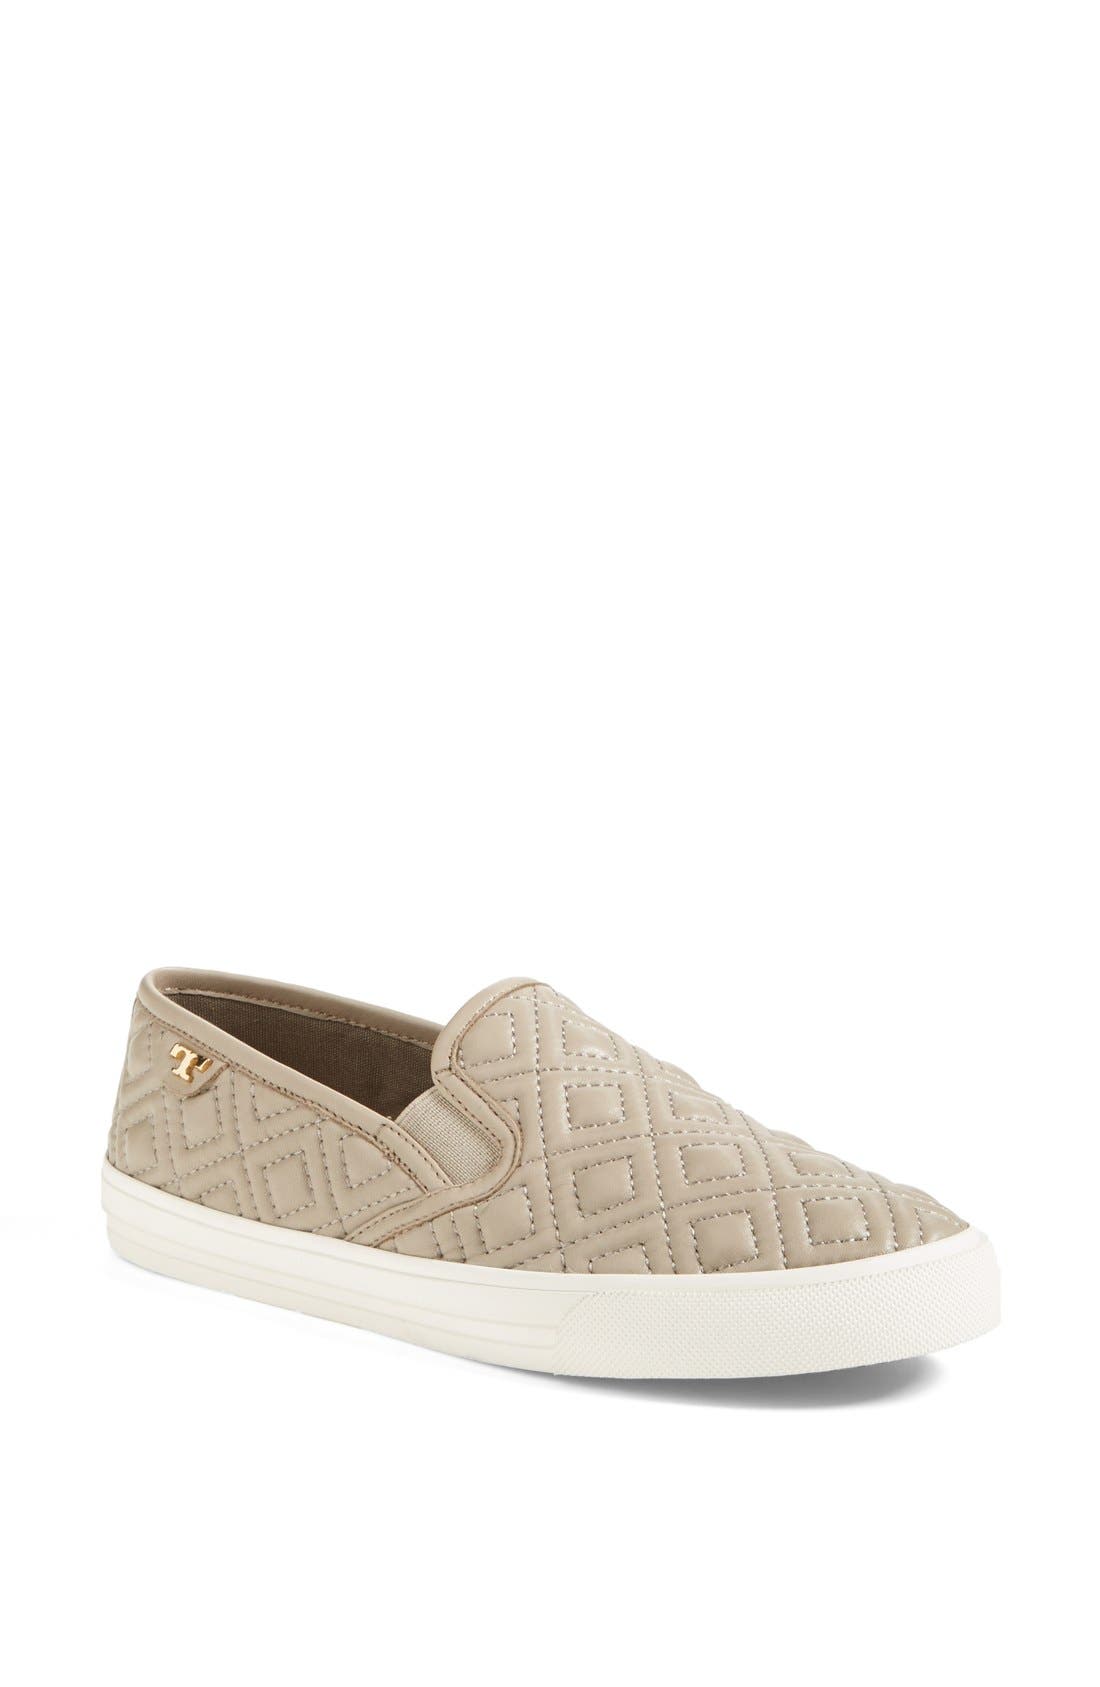 Tory Burch 'Jesse' Quilted Leather 